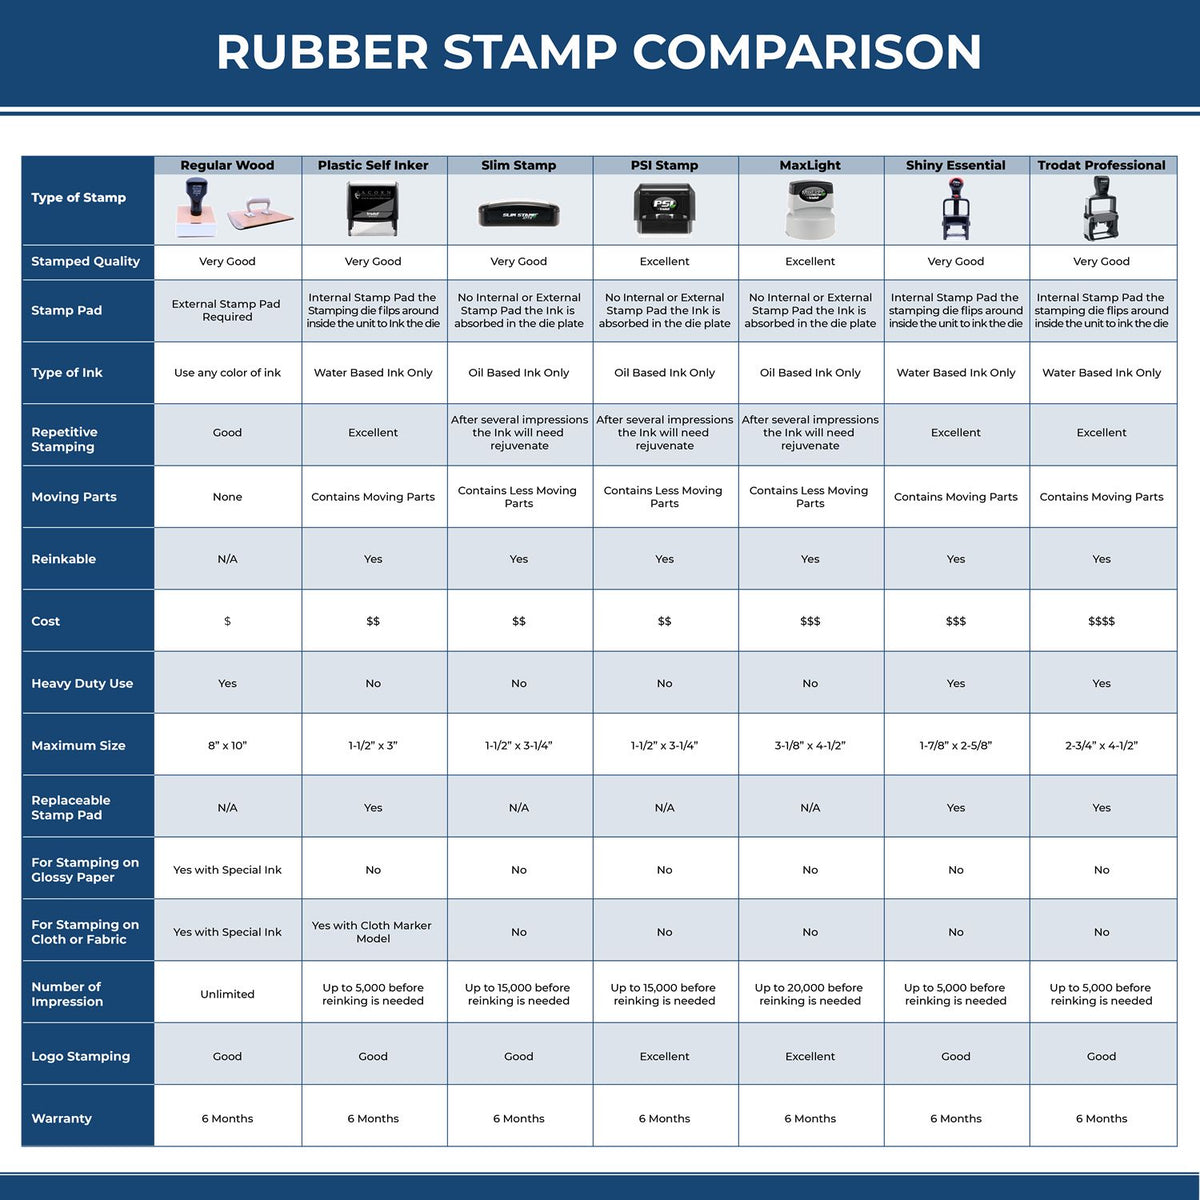 Large Outstanding Rubber Stamp 4700R Rubber Stamp Comparison